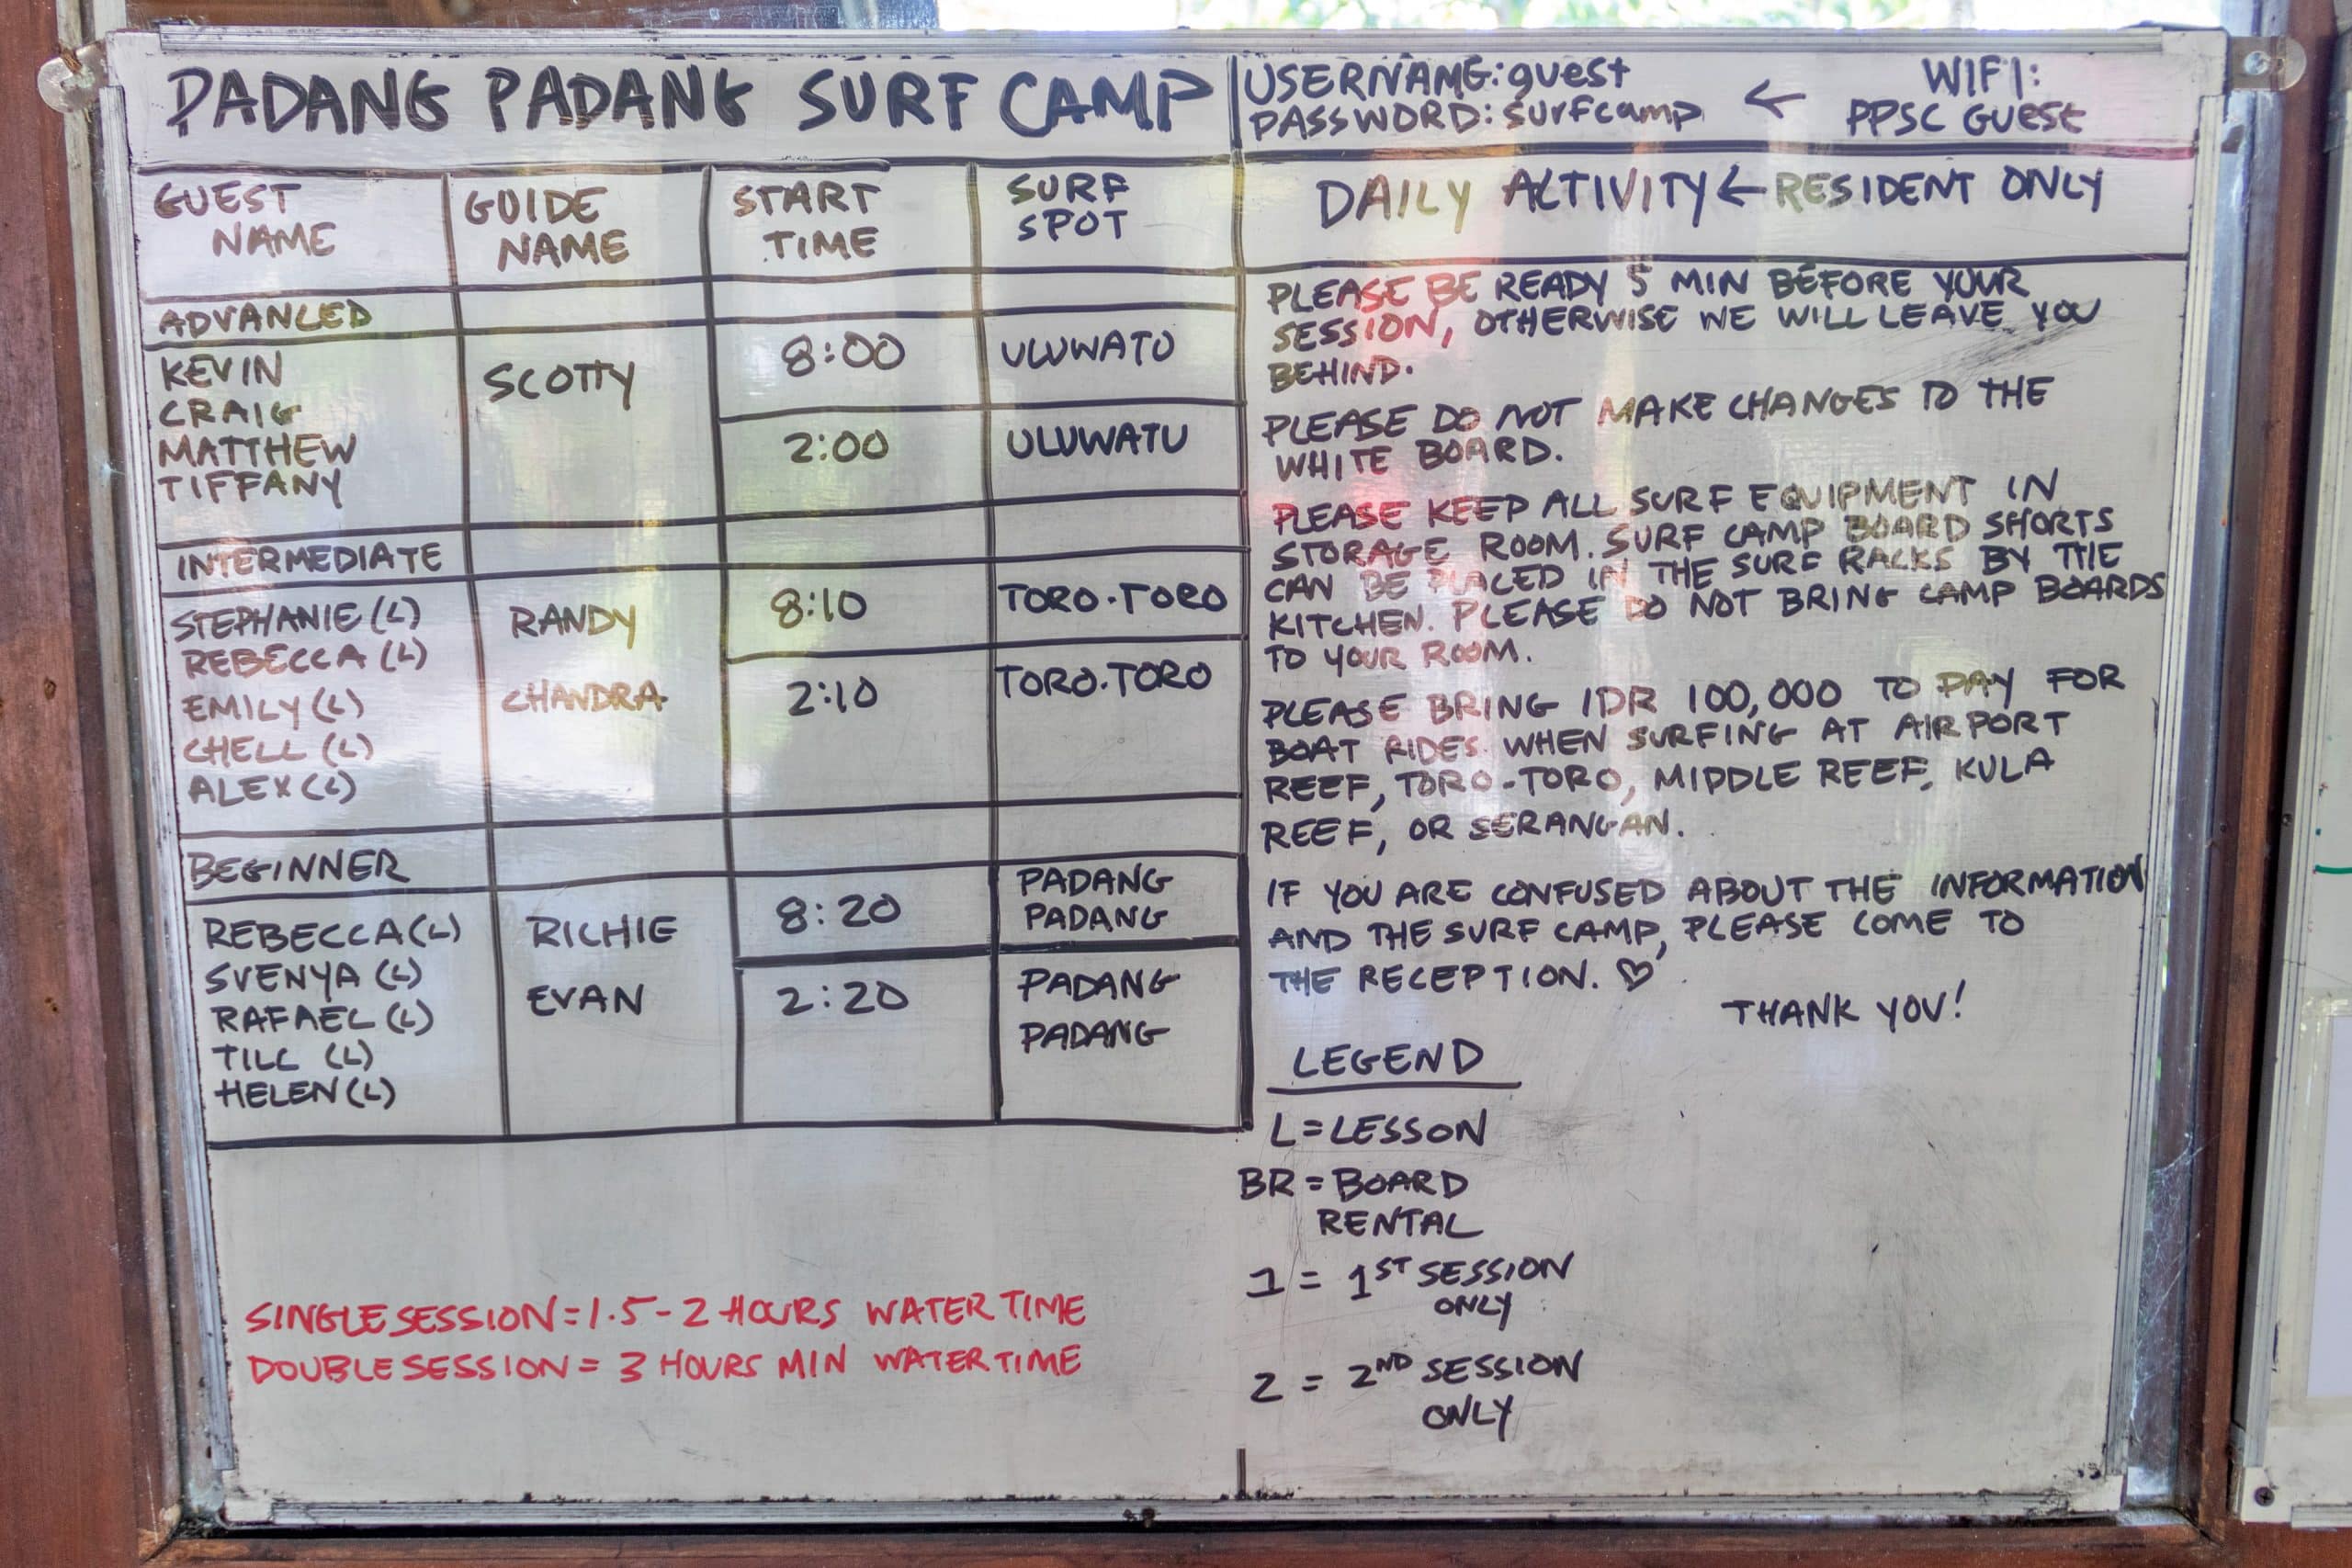 Surf white board at PPSC